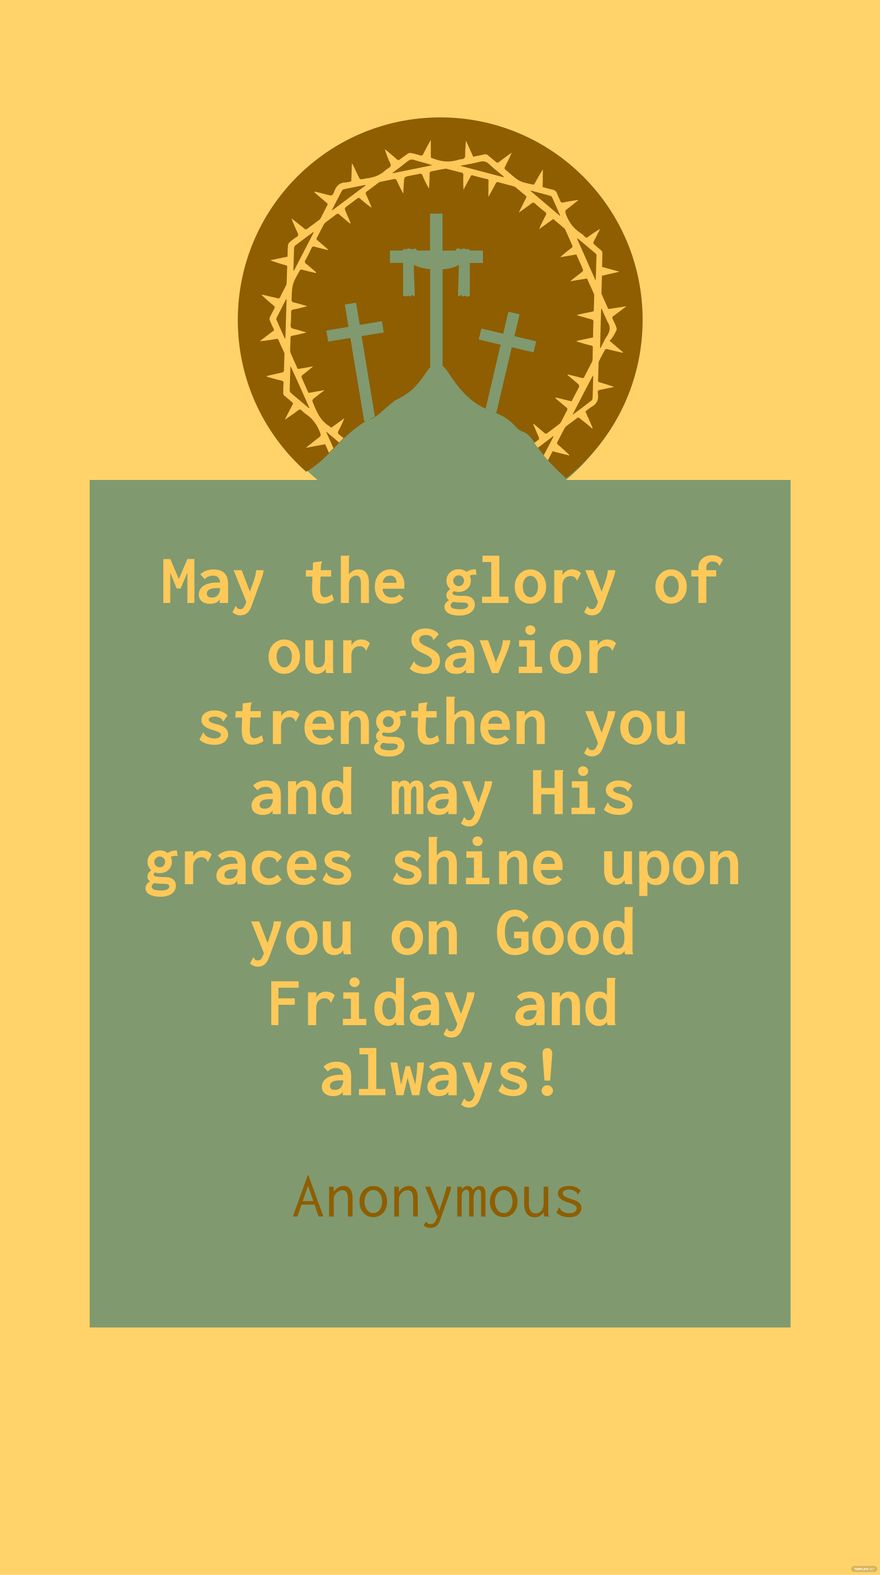 Free Anonymous - May the glory of our Savior strengthen you and may His graces shine upon you on Good Friday and always!